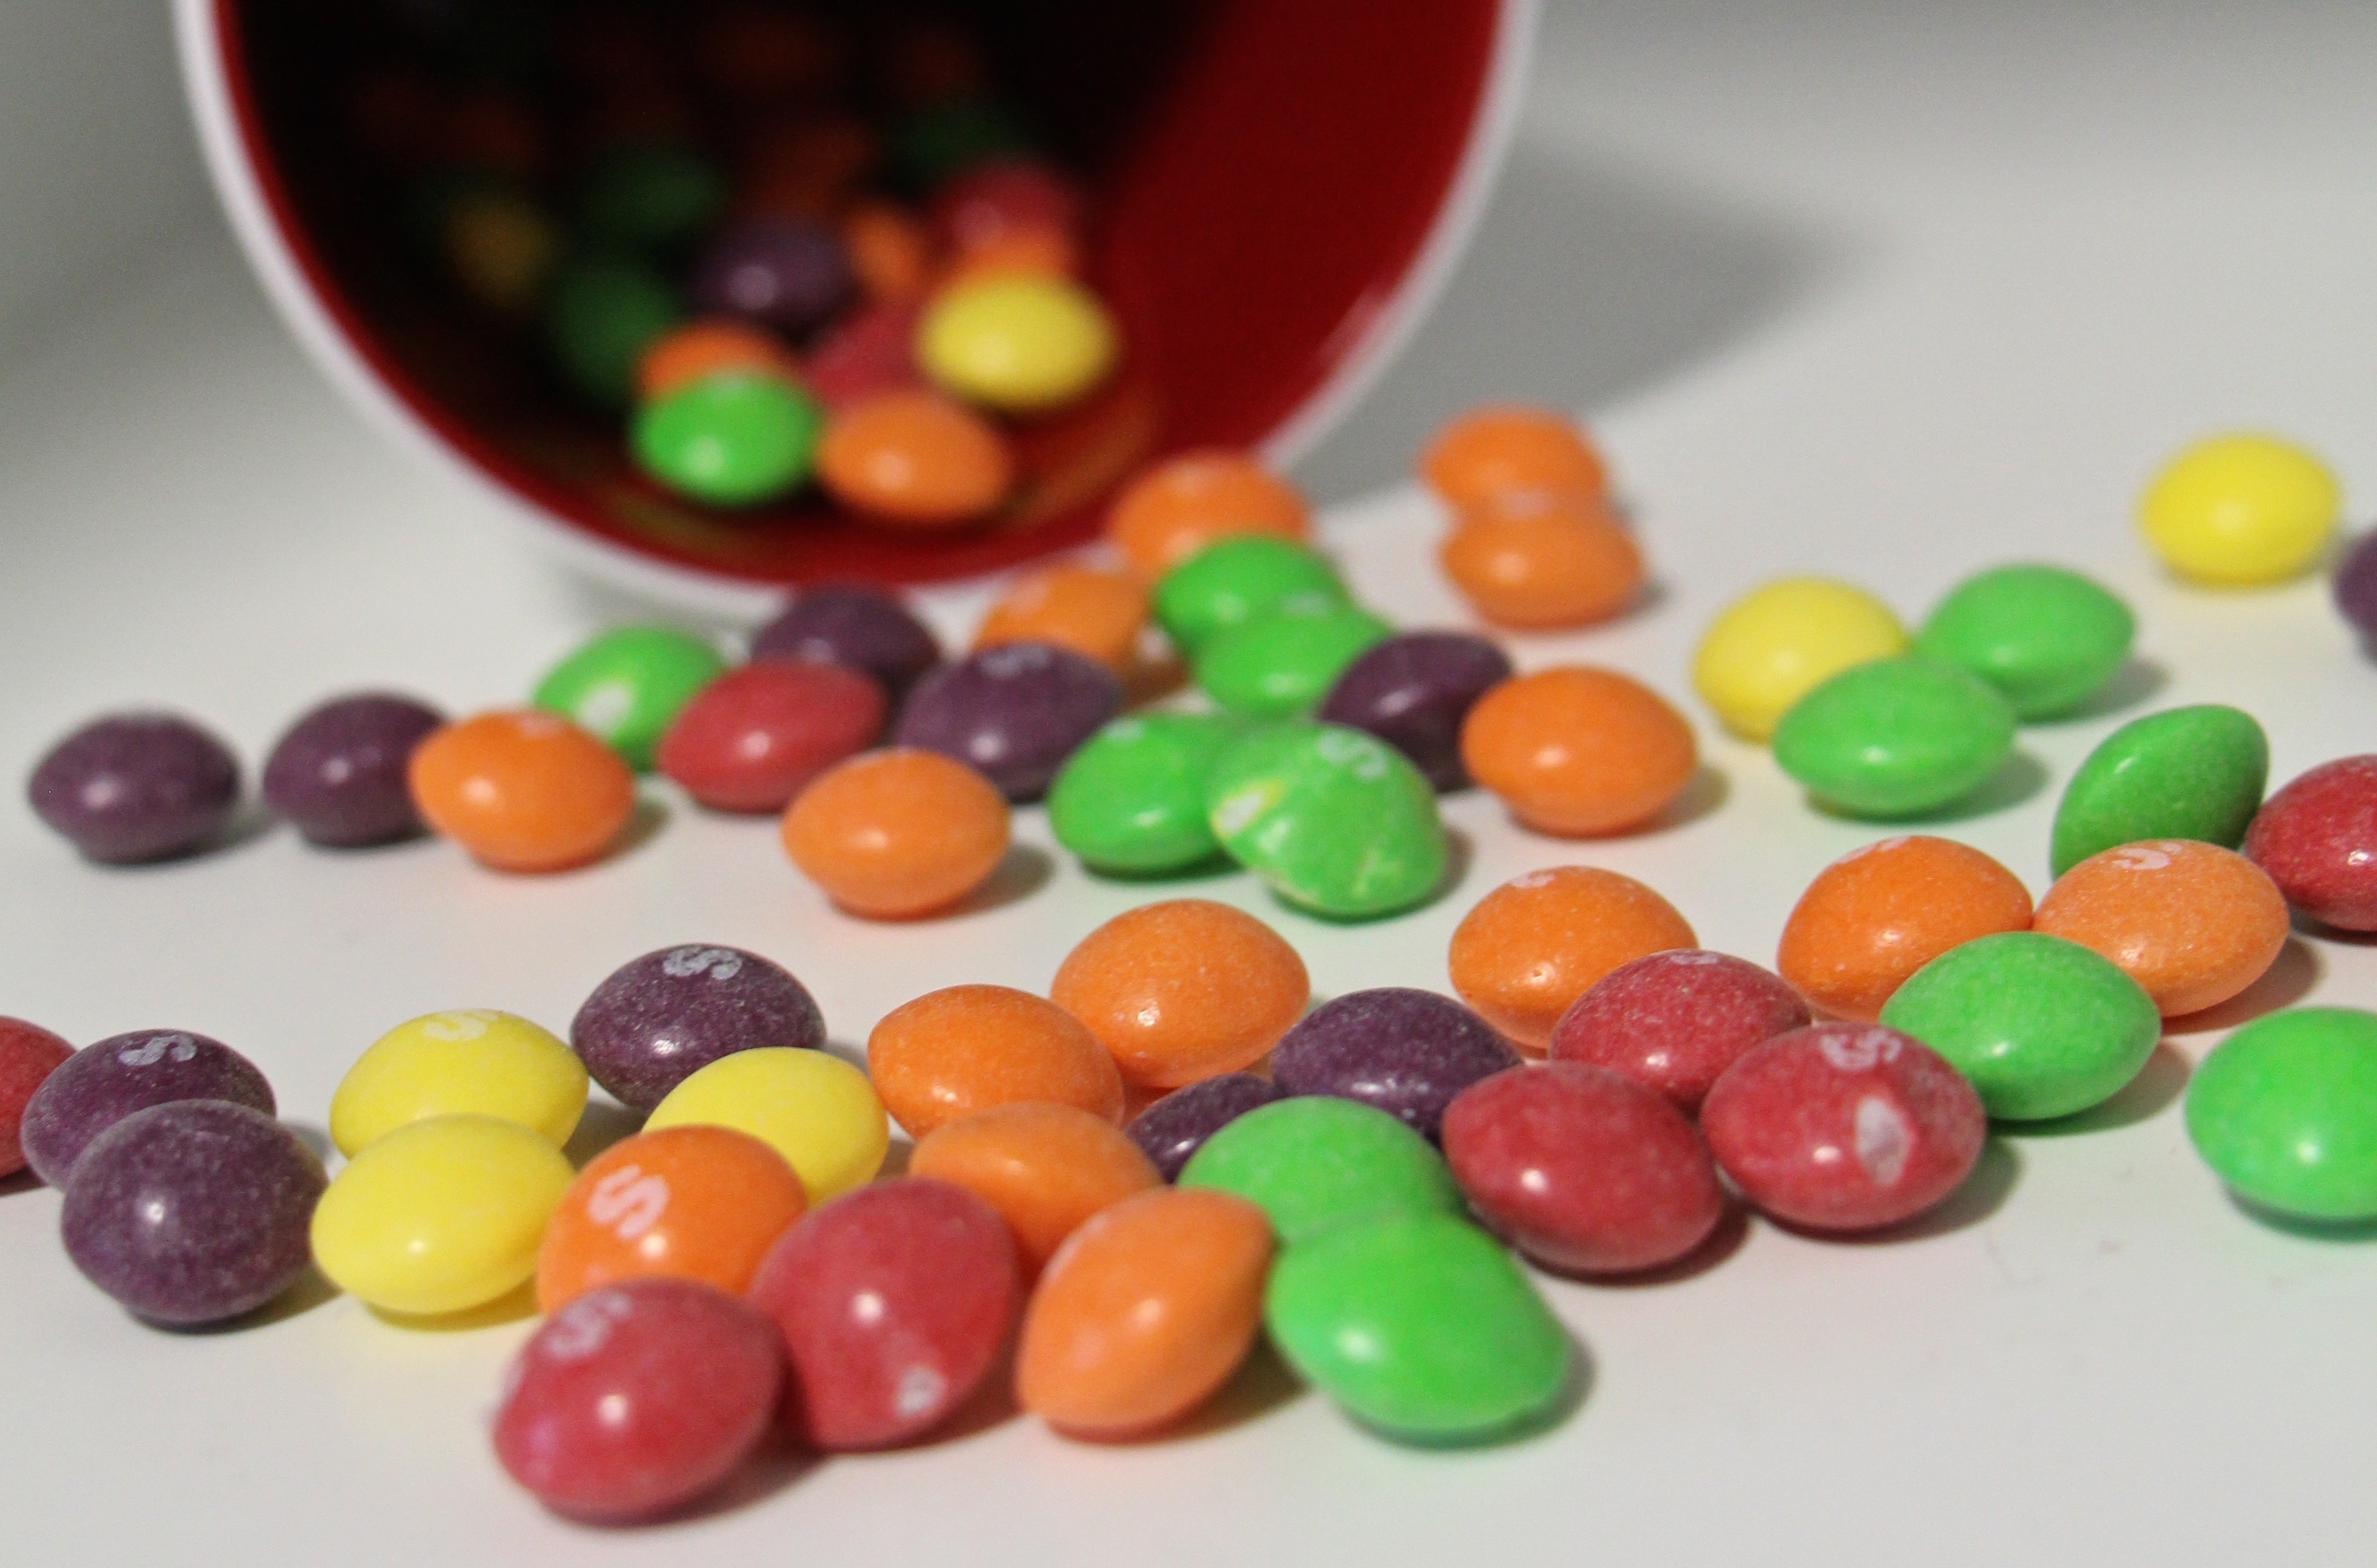 close-up photo of multicolored chocolate coated candies placed on white panel